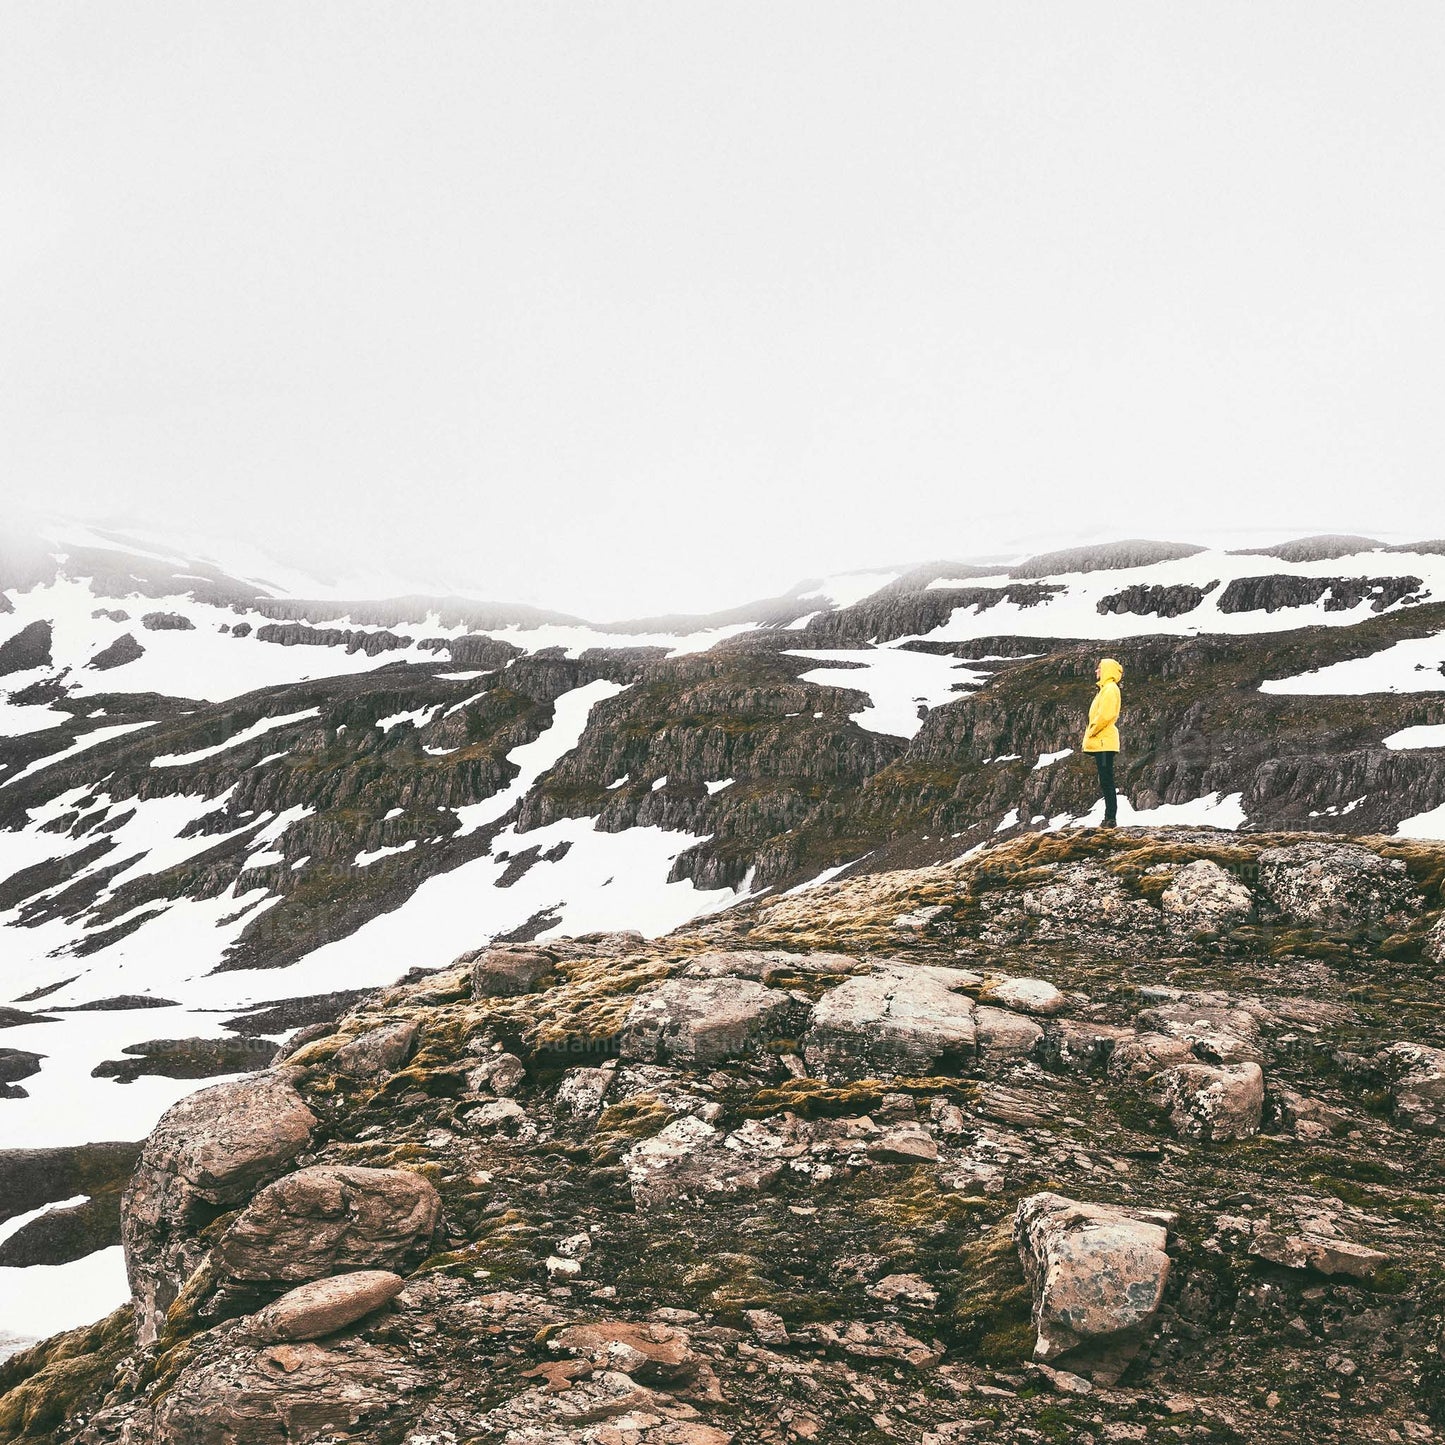 Wanderlust adventure travel photography print featuring a lonely hiker in Iceland